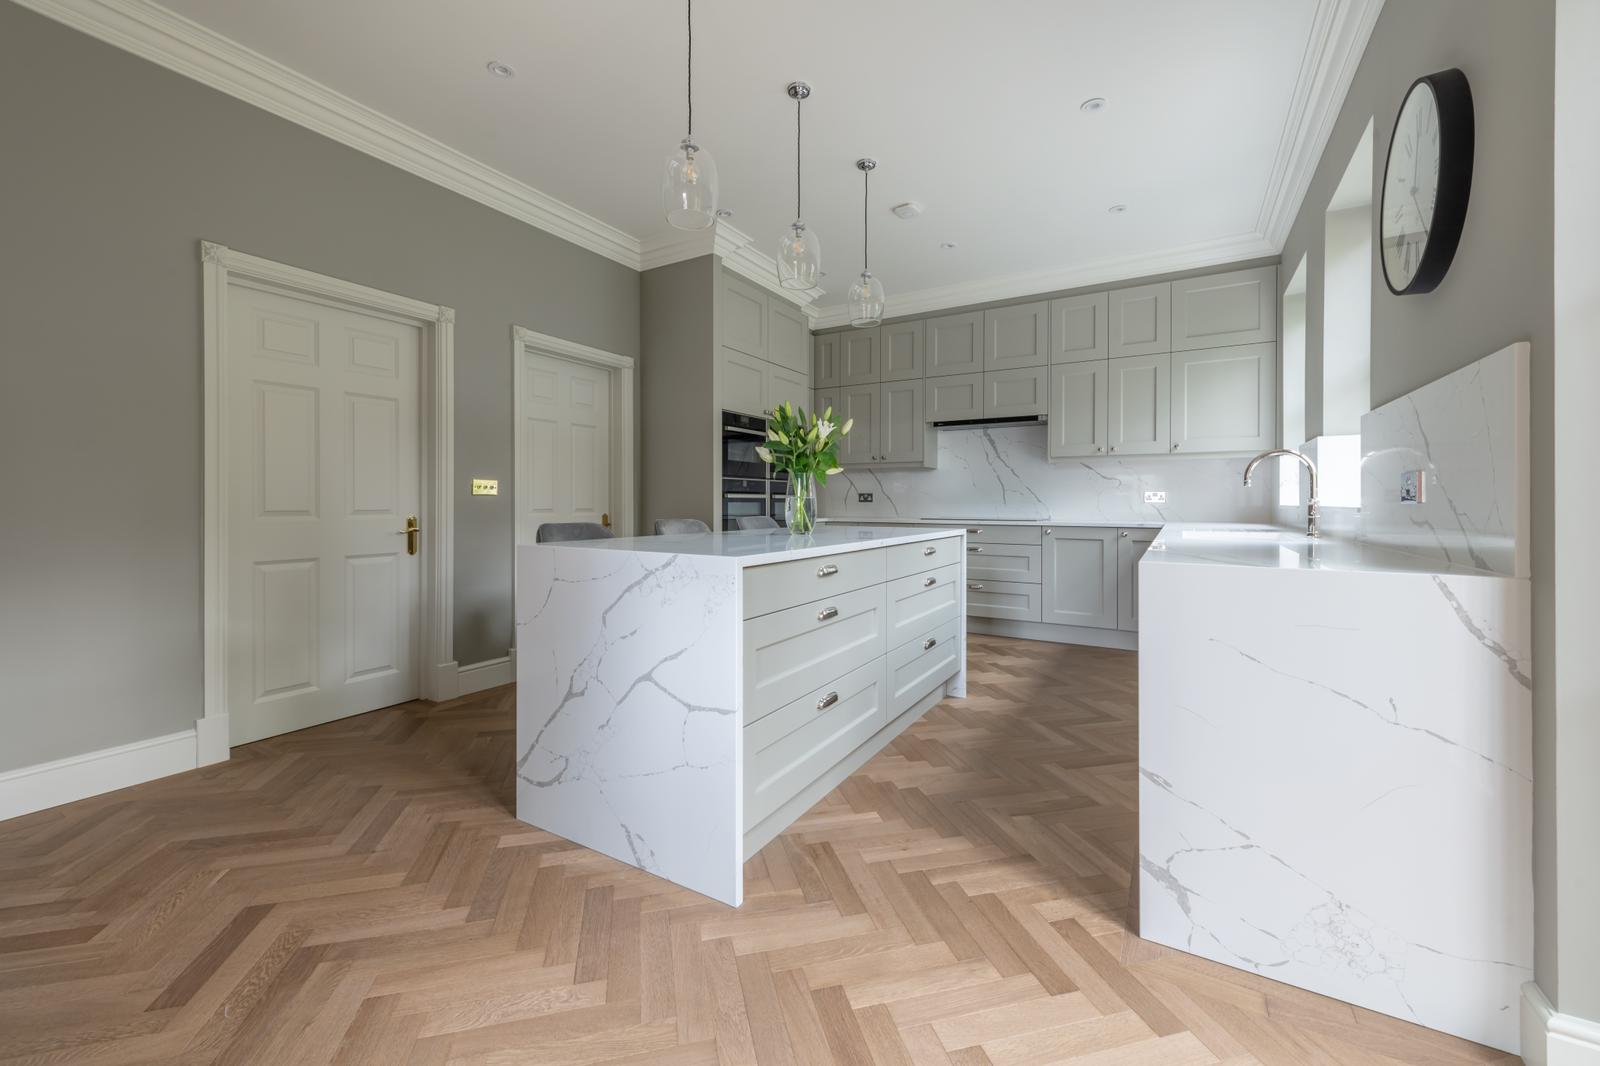 Our client selected the Istoria Bespoke St. Pauls for the residential project in Essex in our smallest size, 15/4 x 70 x 350mm Herringbone, to be installed with a double border.<br />
The Istoria Bespoke St. Pauls is a smoked colour which gives the floor a varied range of complimentary tones to provide a completely unique finish and unlimited design options, as no two boards will be the same colour.<br />
Thank you to the client for sharing the beautiful photos with us.<br />
Project: Residential<br />
Installation: Jordan Andrews Limited<br />
Floor: Istoria Bespoke St. Pauls<br />
Specification: Prime Grade 15/4 x 70 x 350mm Herringbone<br />